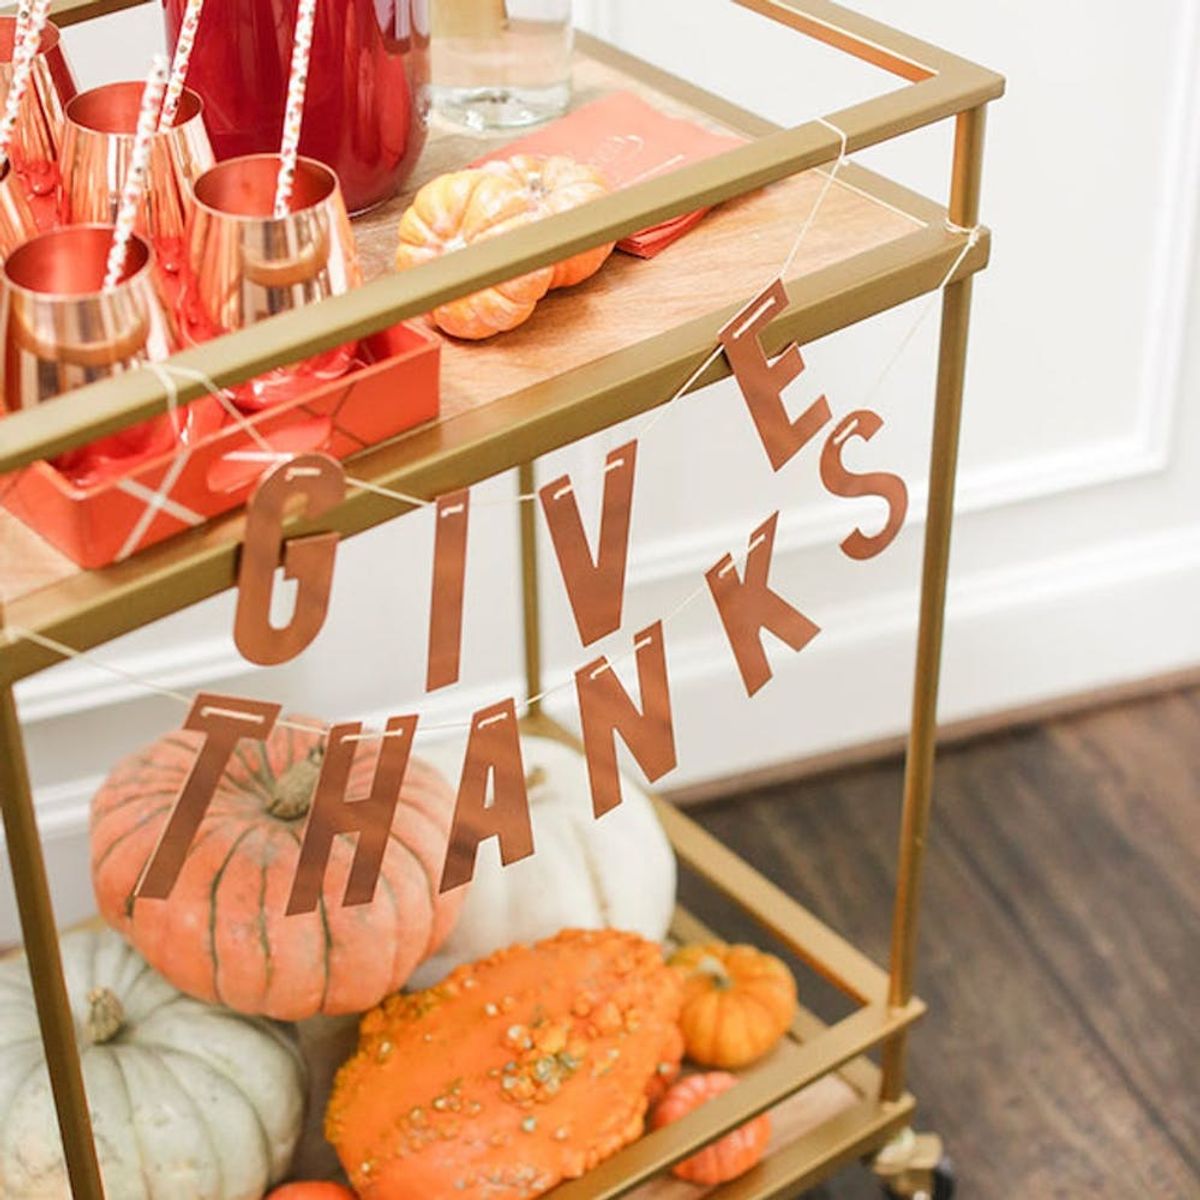 The 6 Top Friendsgiving Trends, According to Pinterest